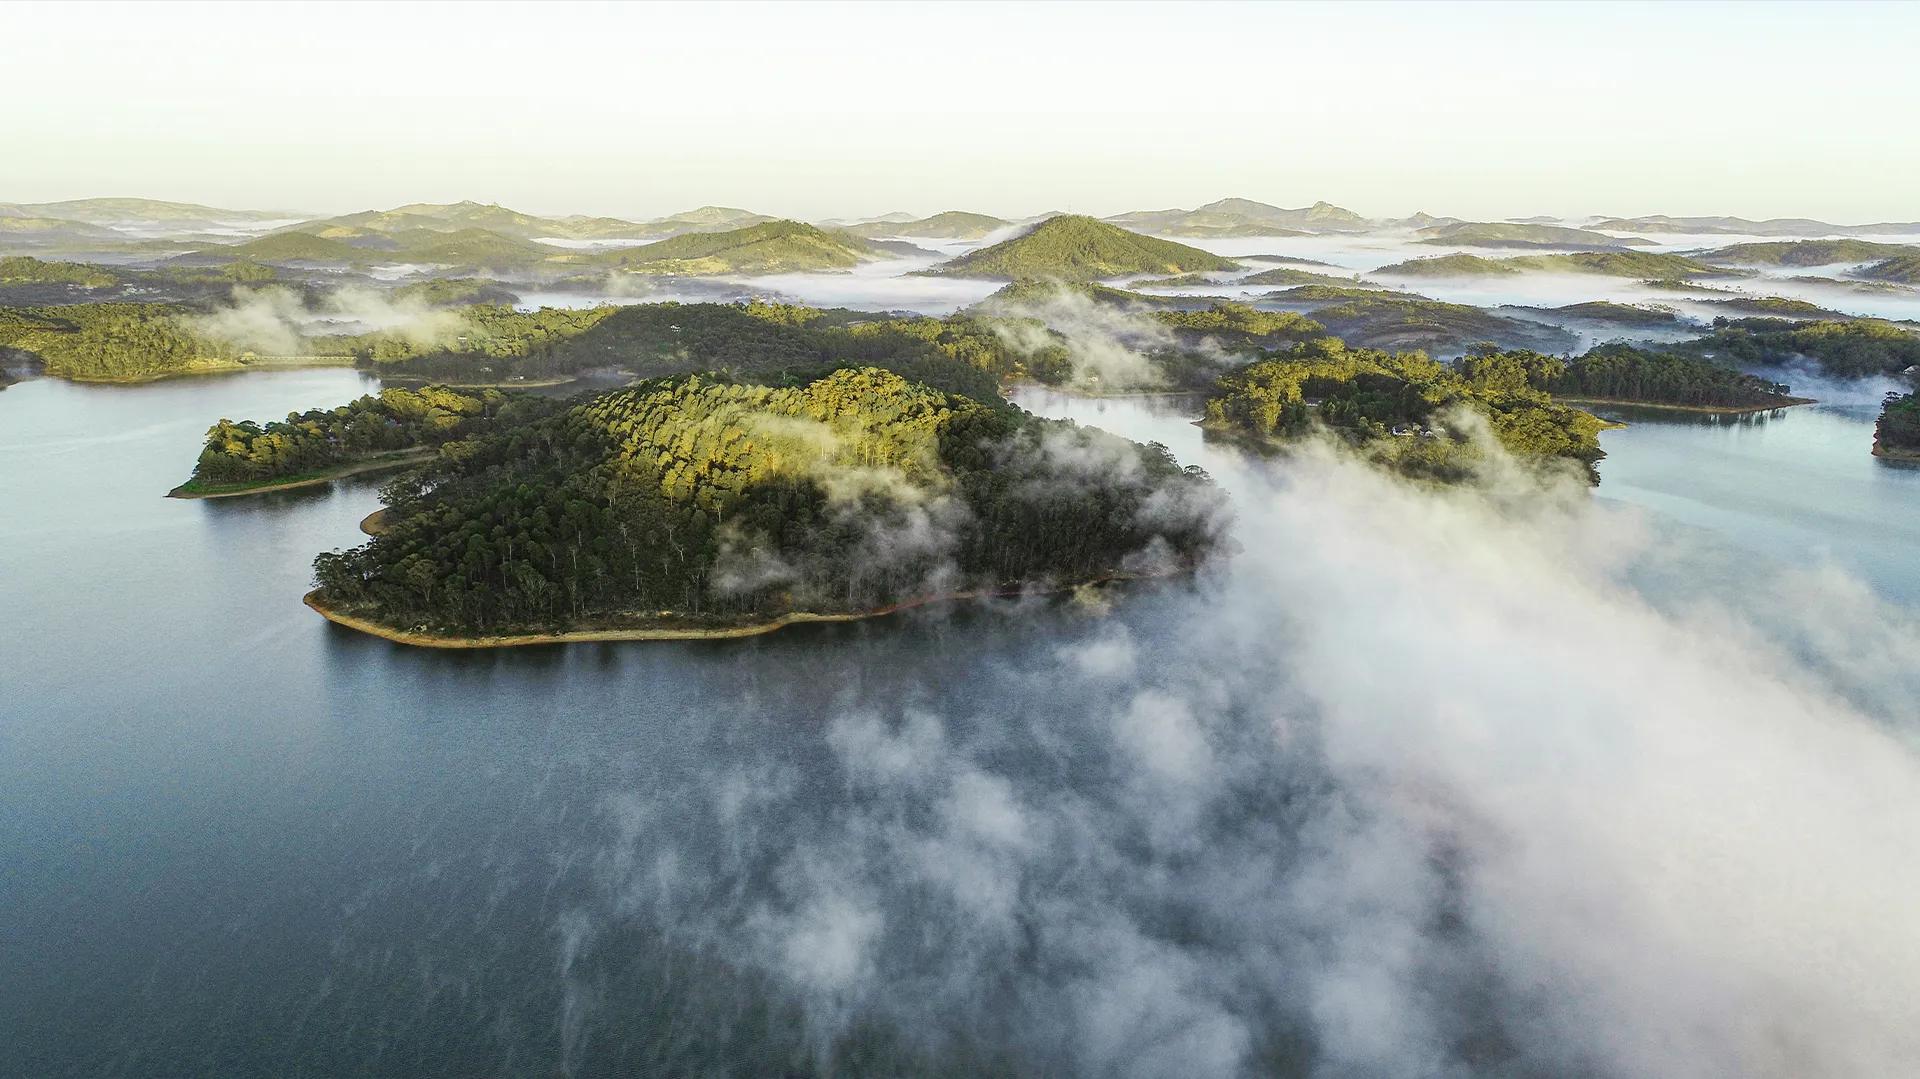 Mantasoa Lake with Drone View and Clouds